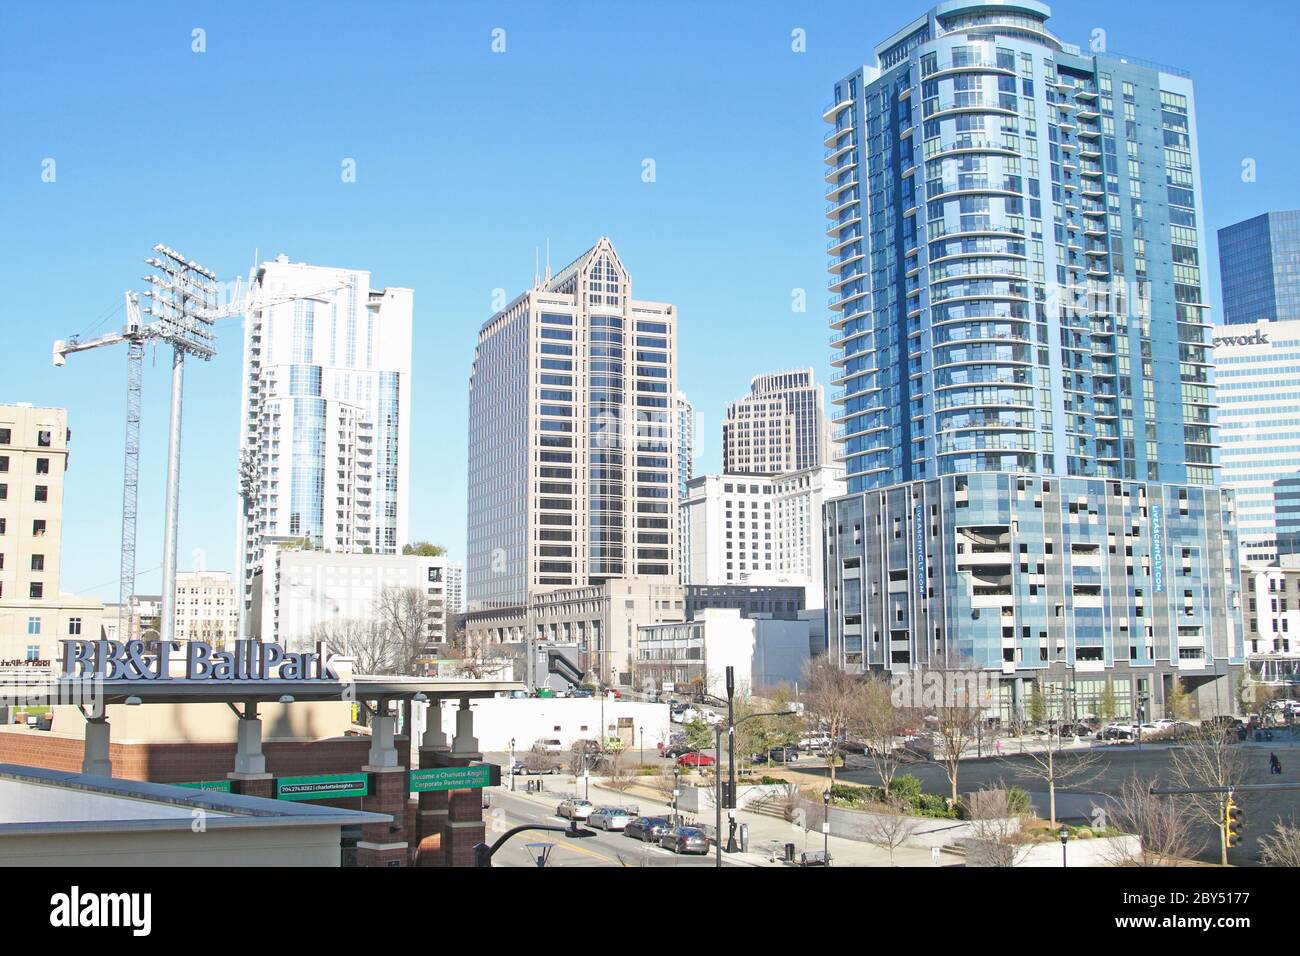 Skyscrapers of the Uptown central business district of Charlotte, North Carolina, USA. On the left is the BB&T Ballpark, home of the Charlotte Knights Stock Photo